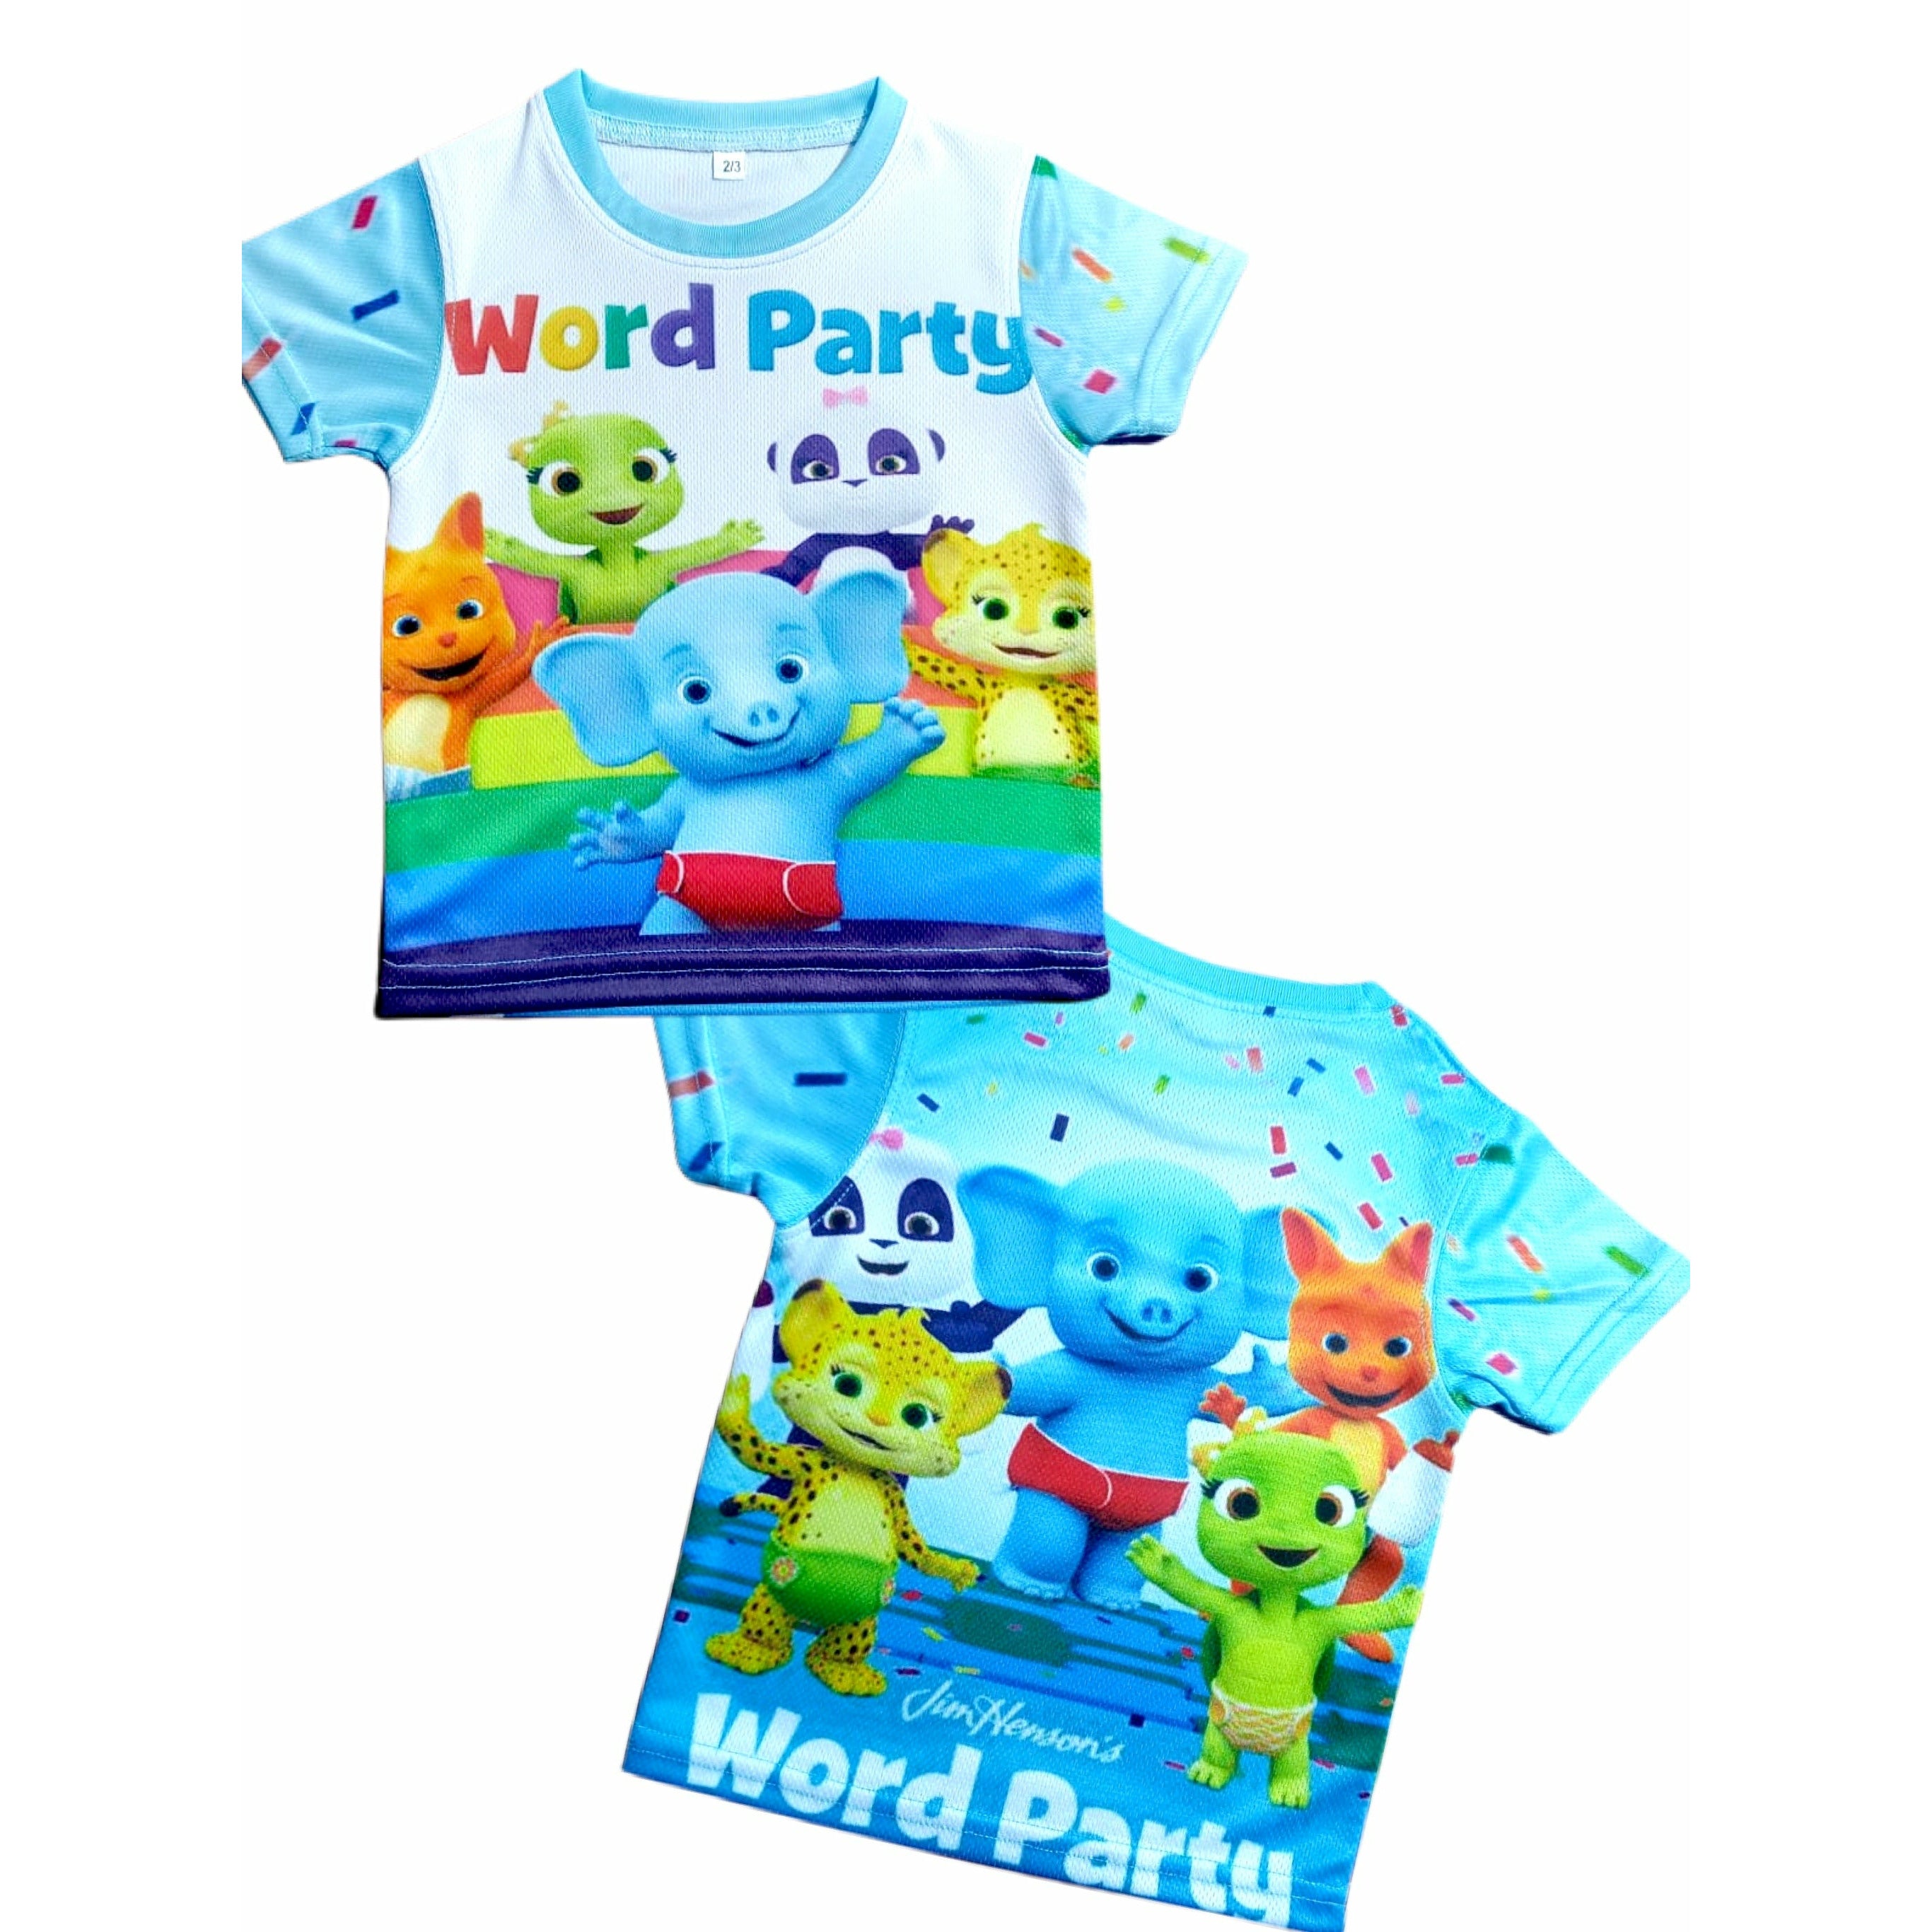 Word Party T Shirt